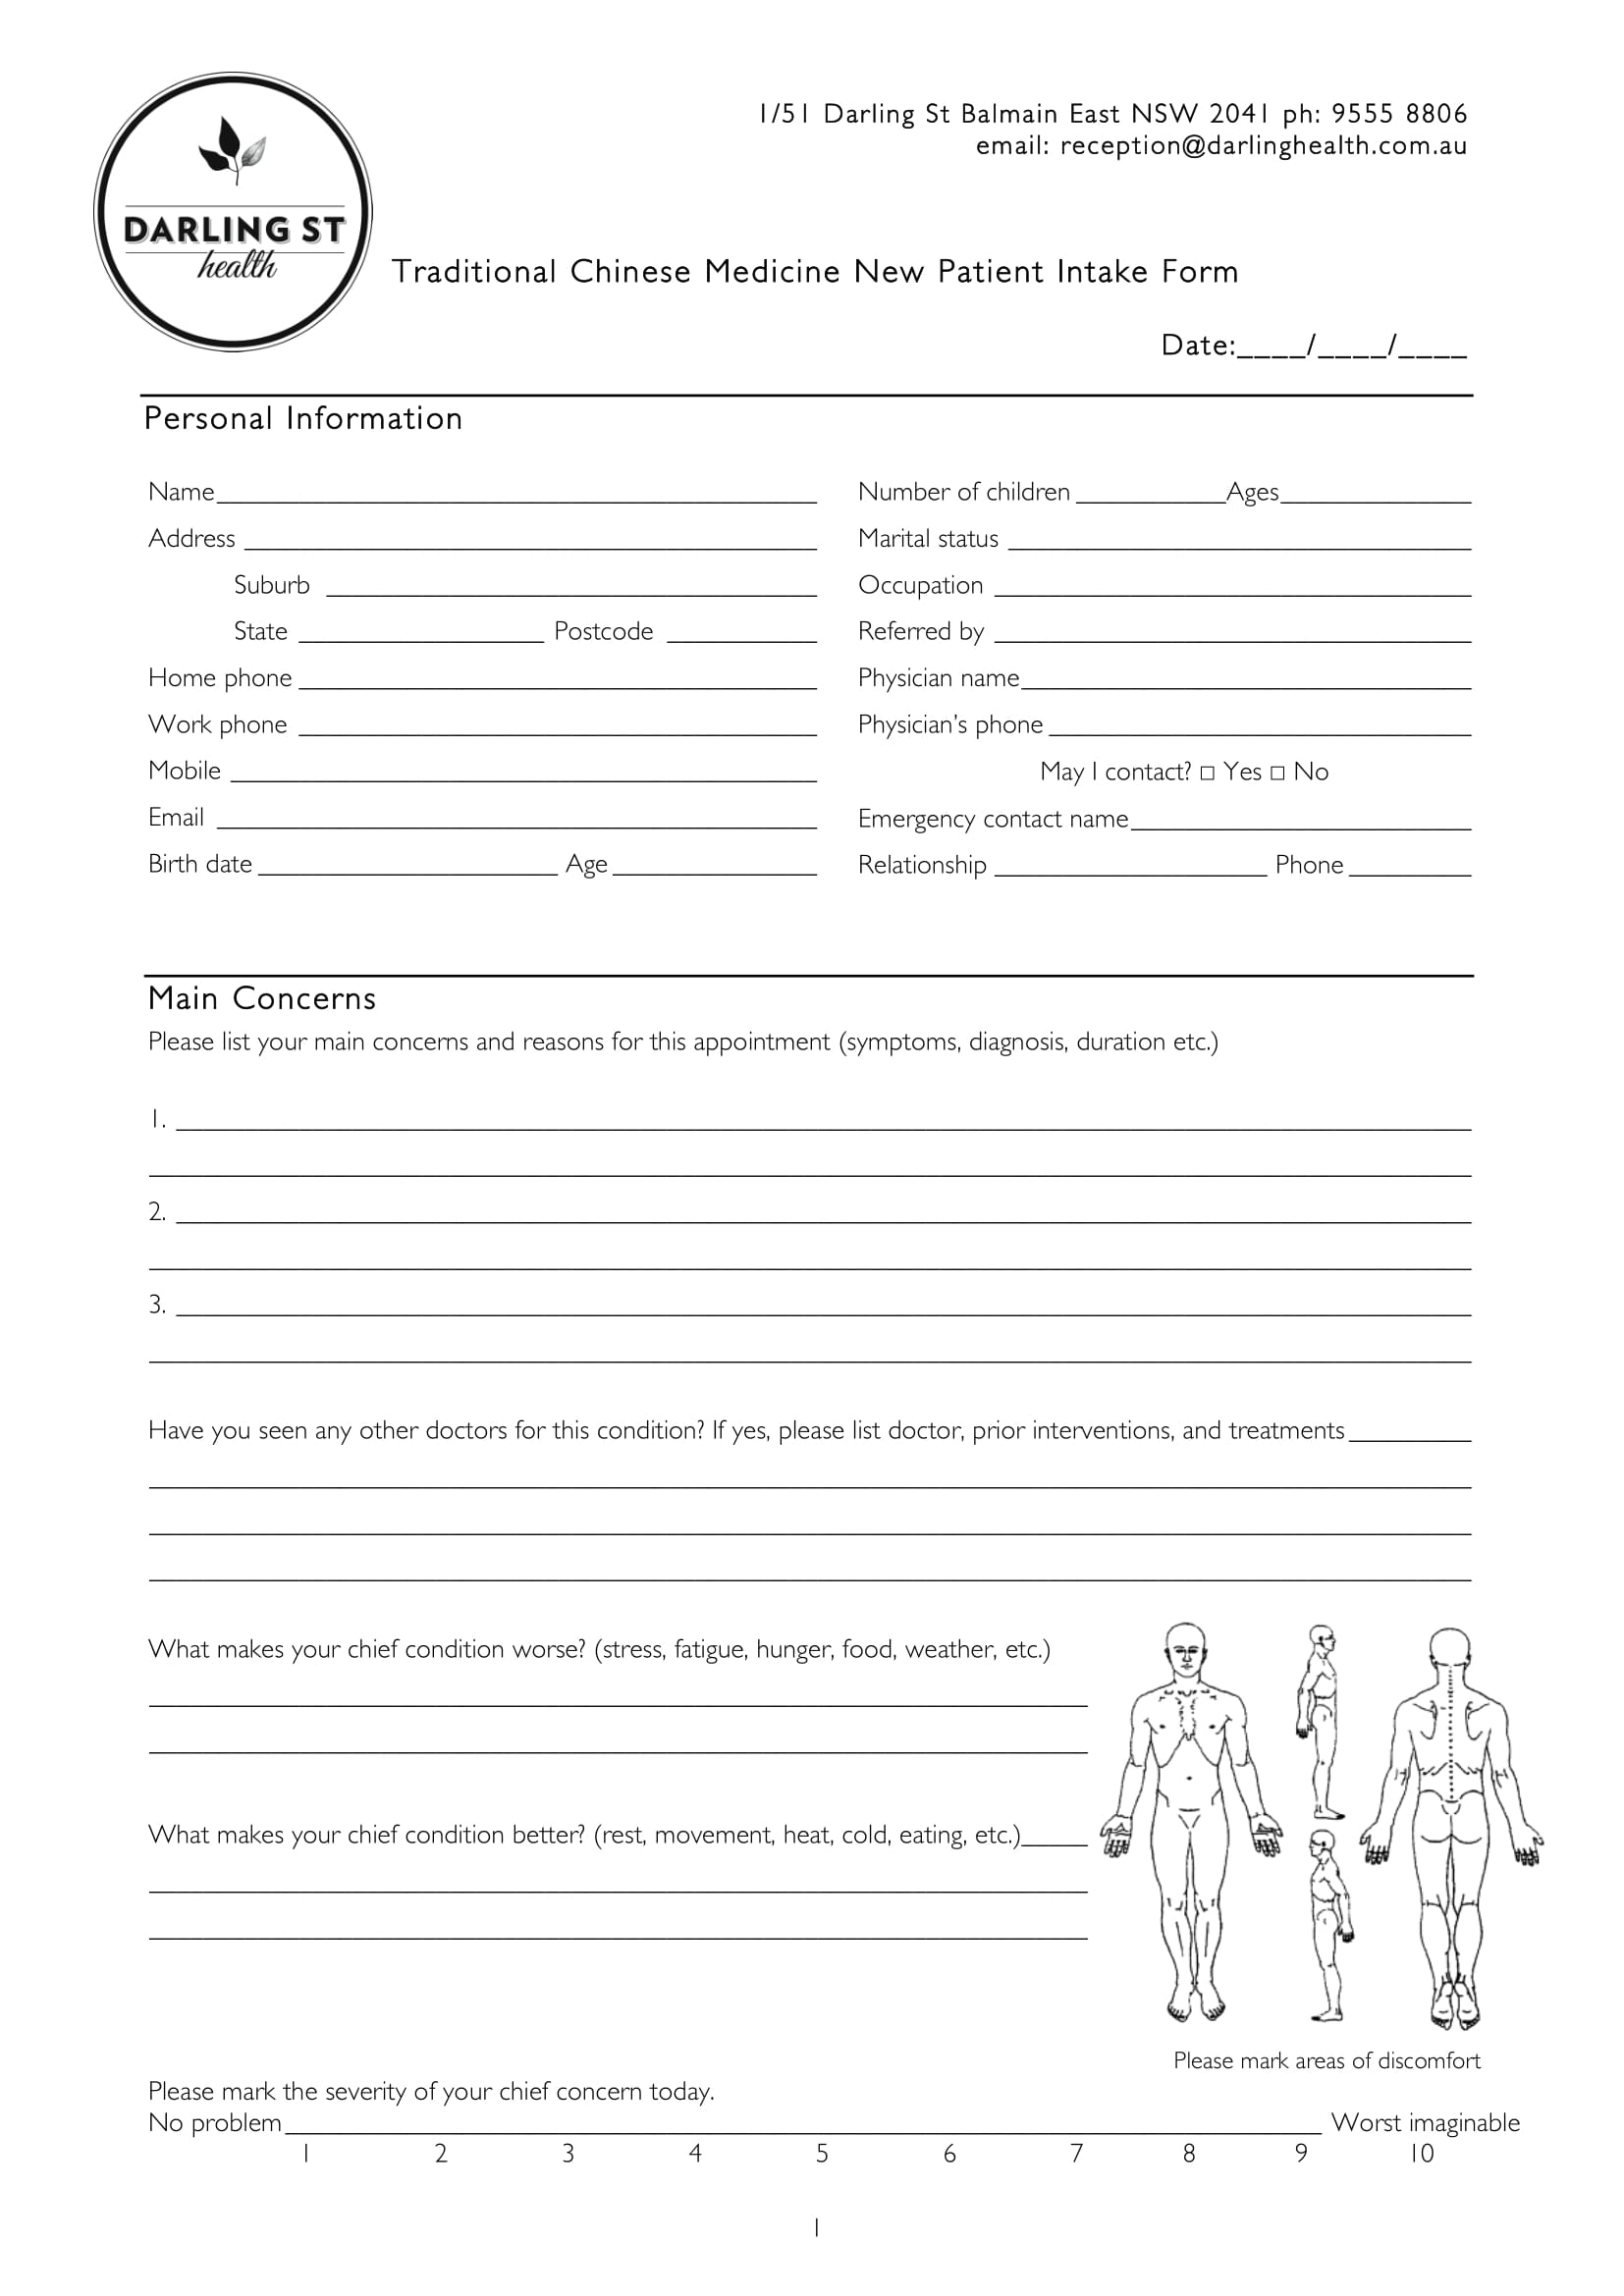 traditional chinese medicine new patient intake form 1